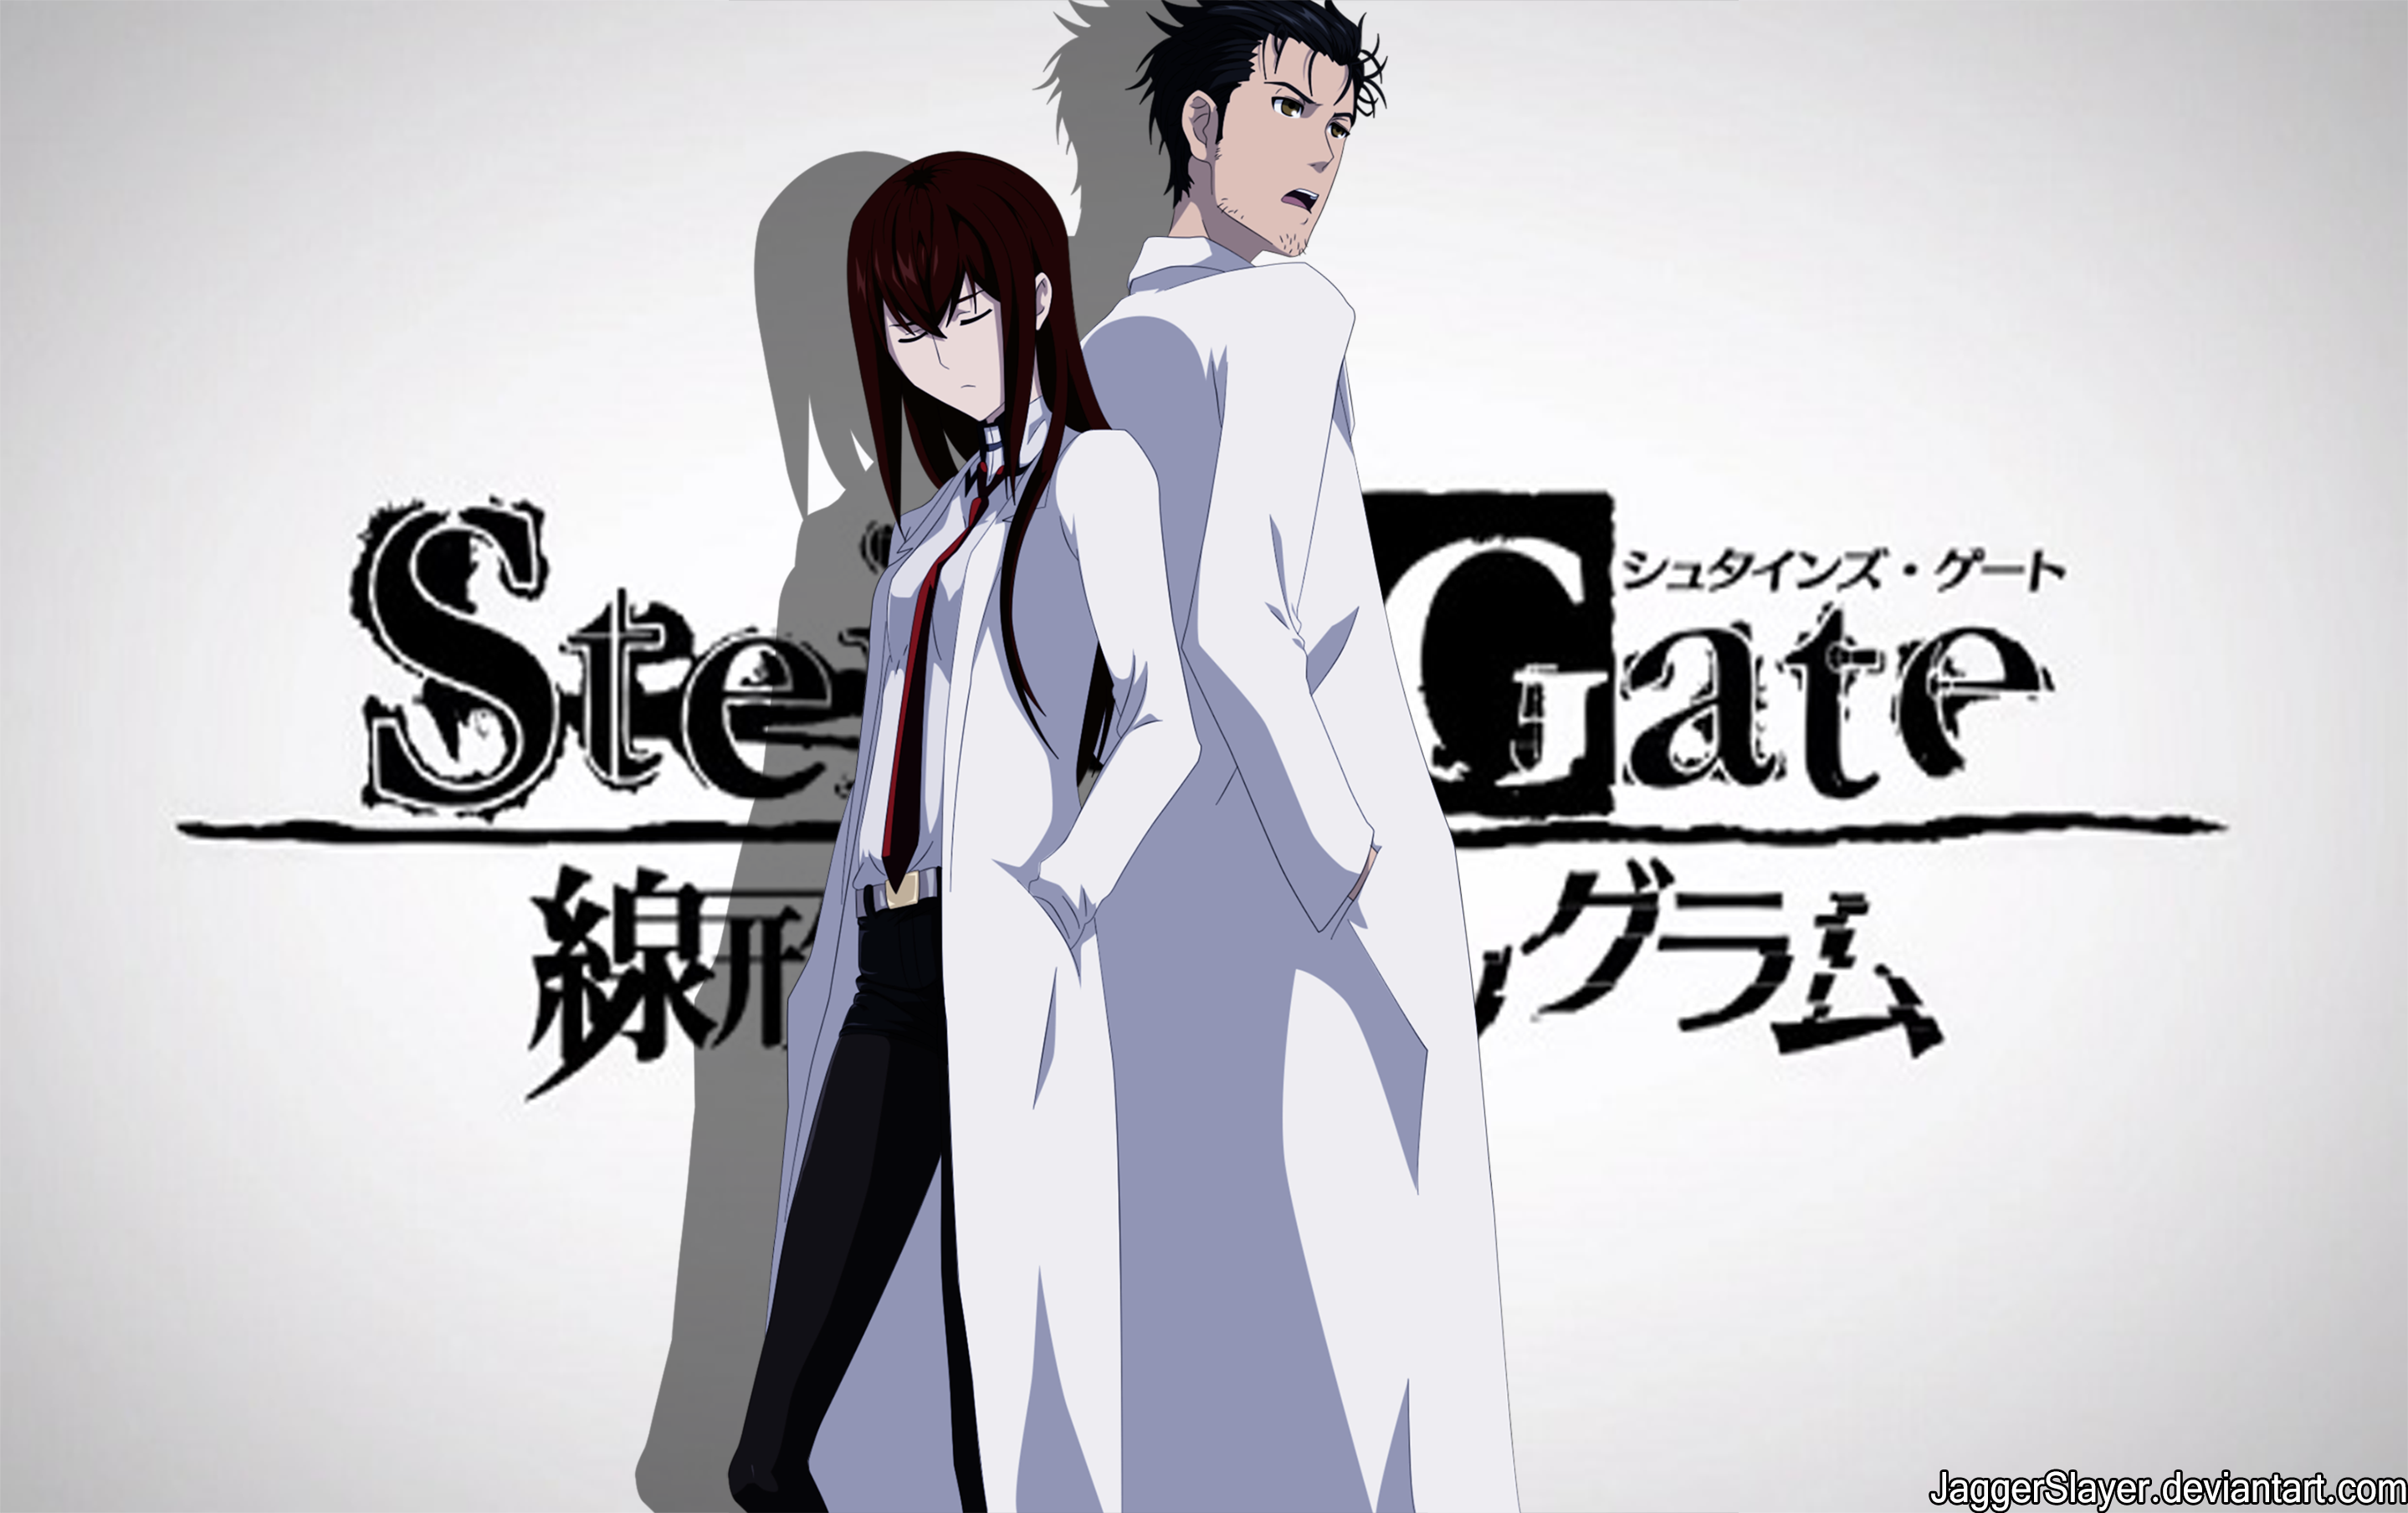 HQ Steins;Gate Wallpapers | File 1406.26Kb